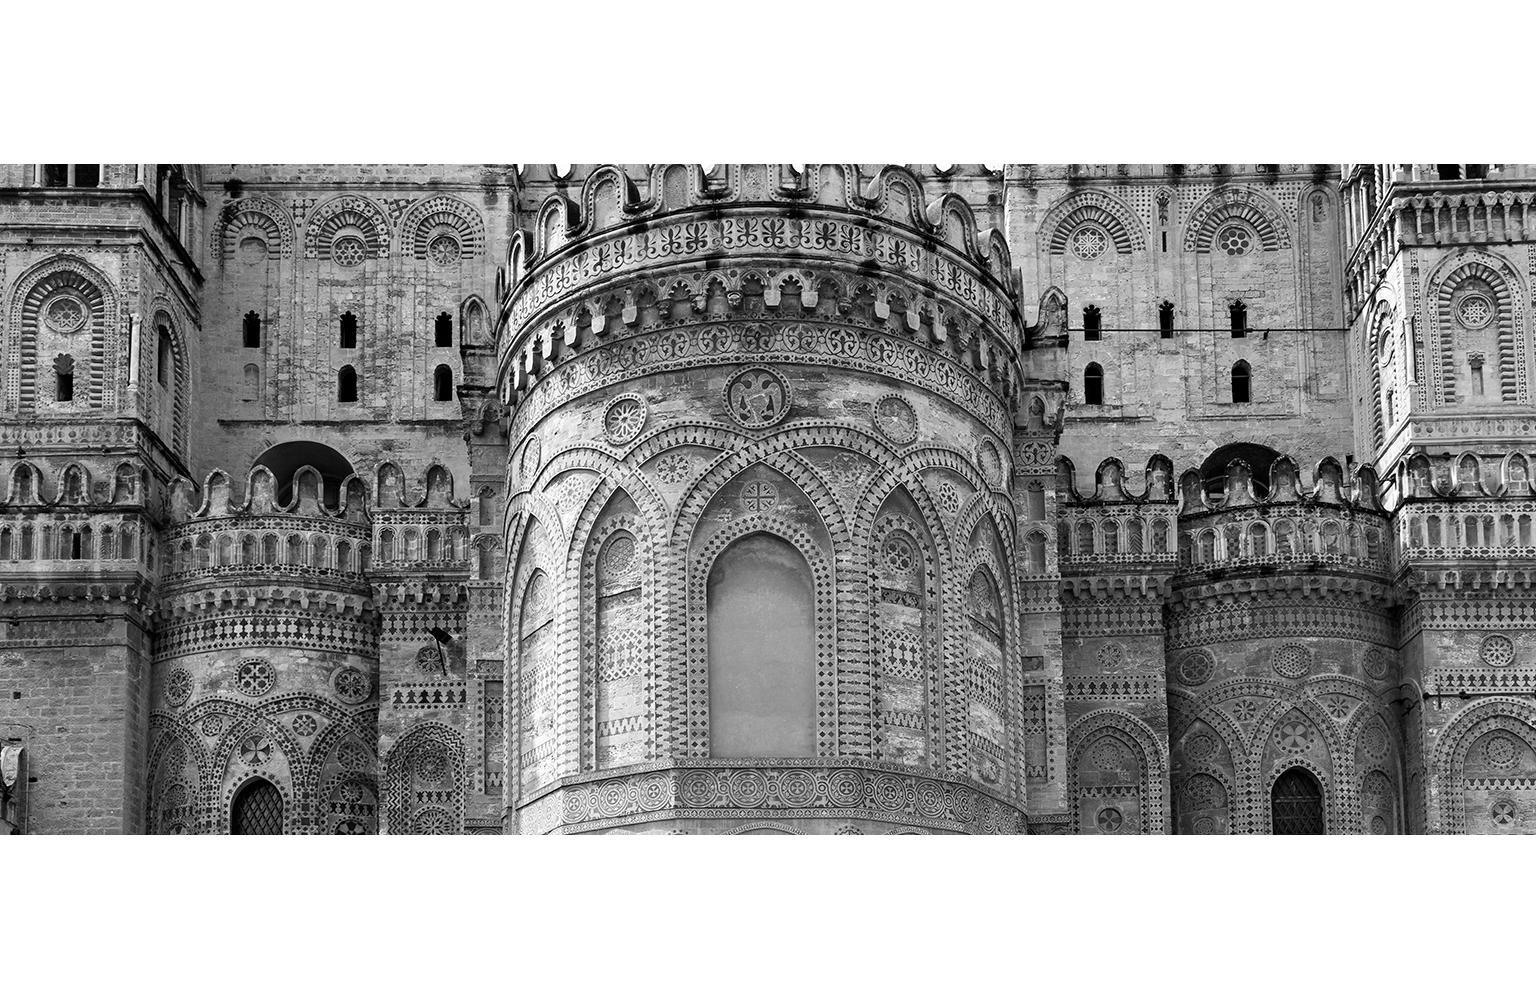  Cosmo Condina Black and White Photograph - Palermo Cathedral: Detail, Palermo, Sicily, Italy,  2017.